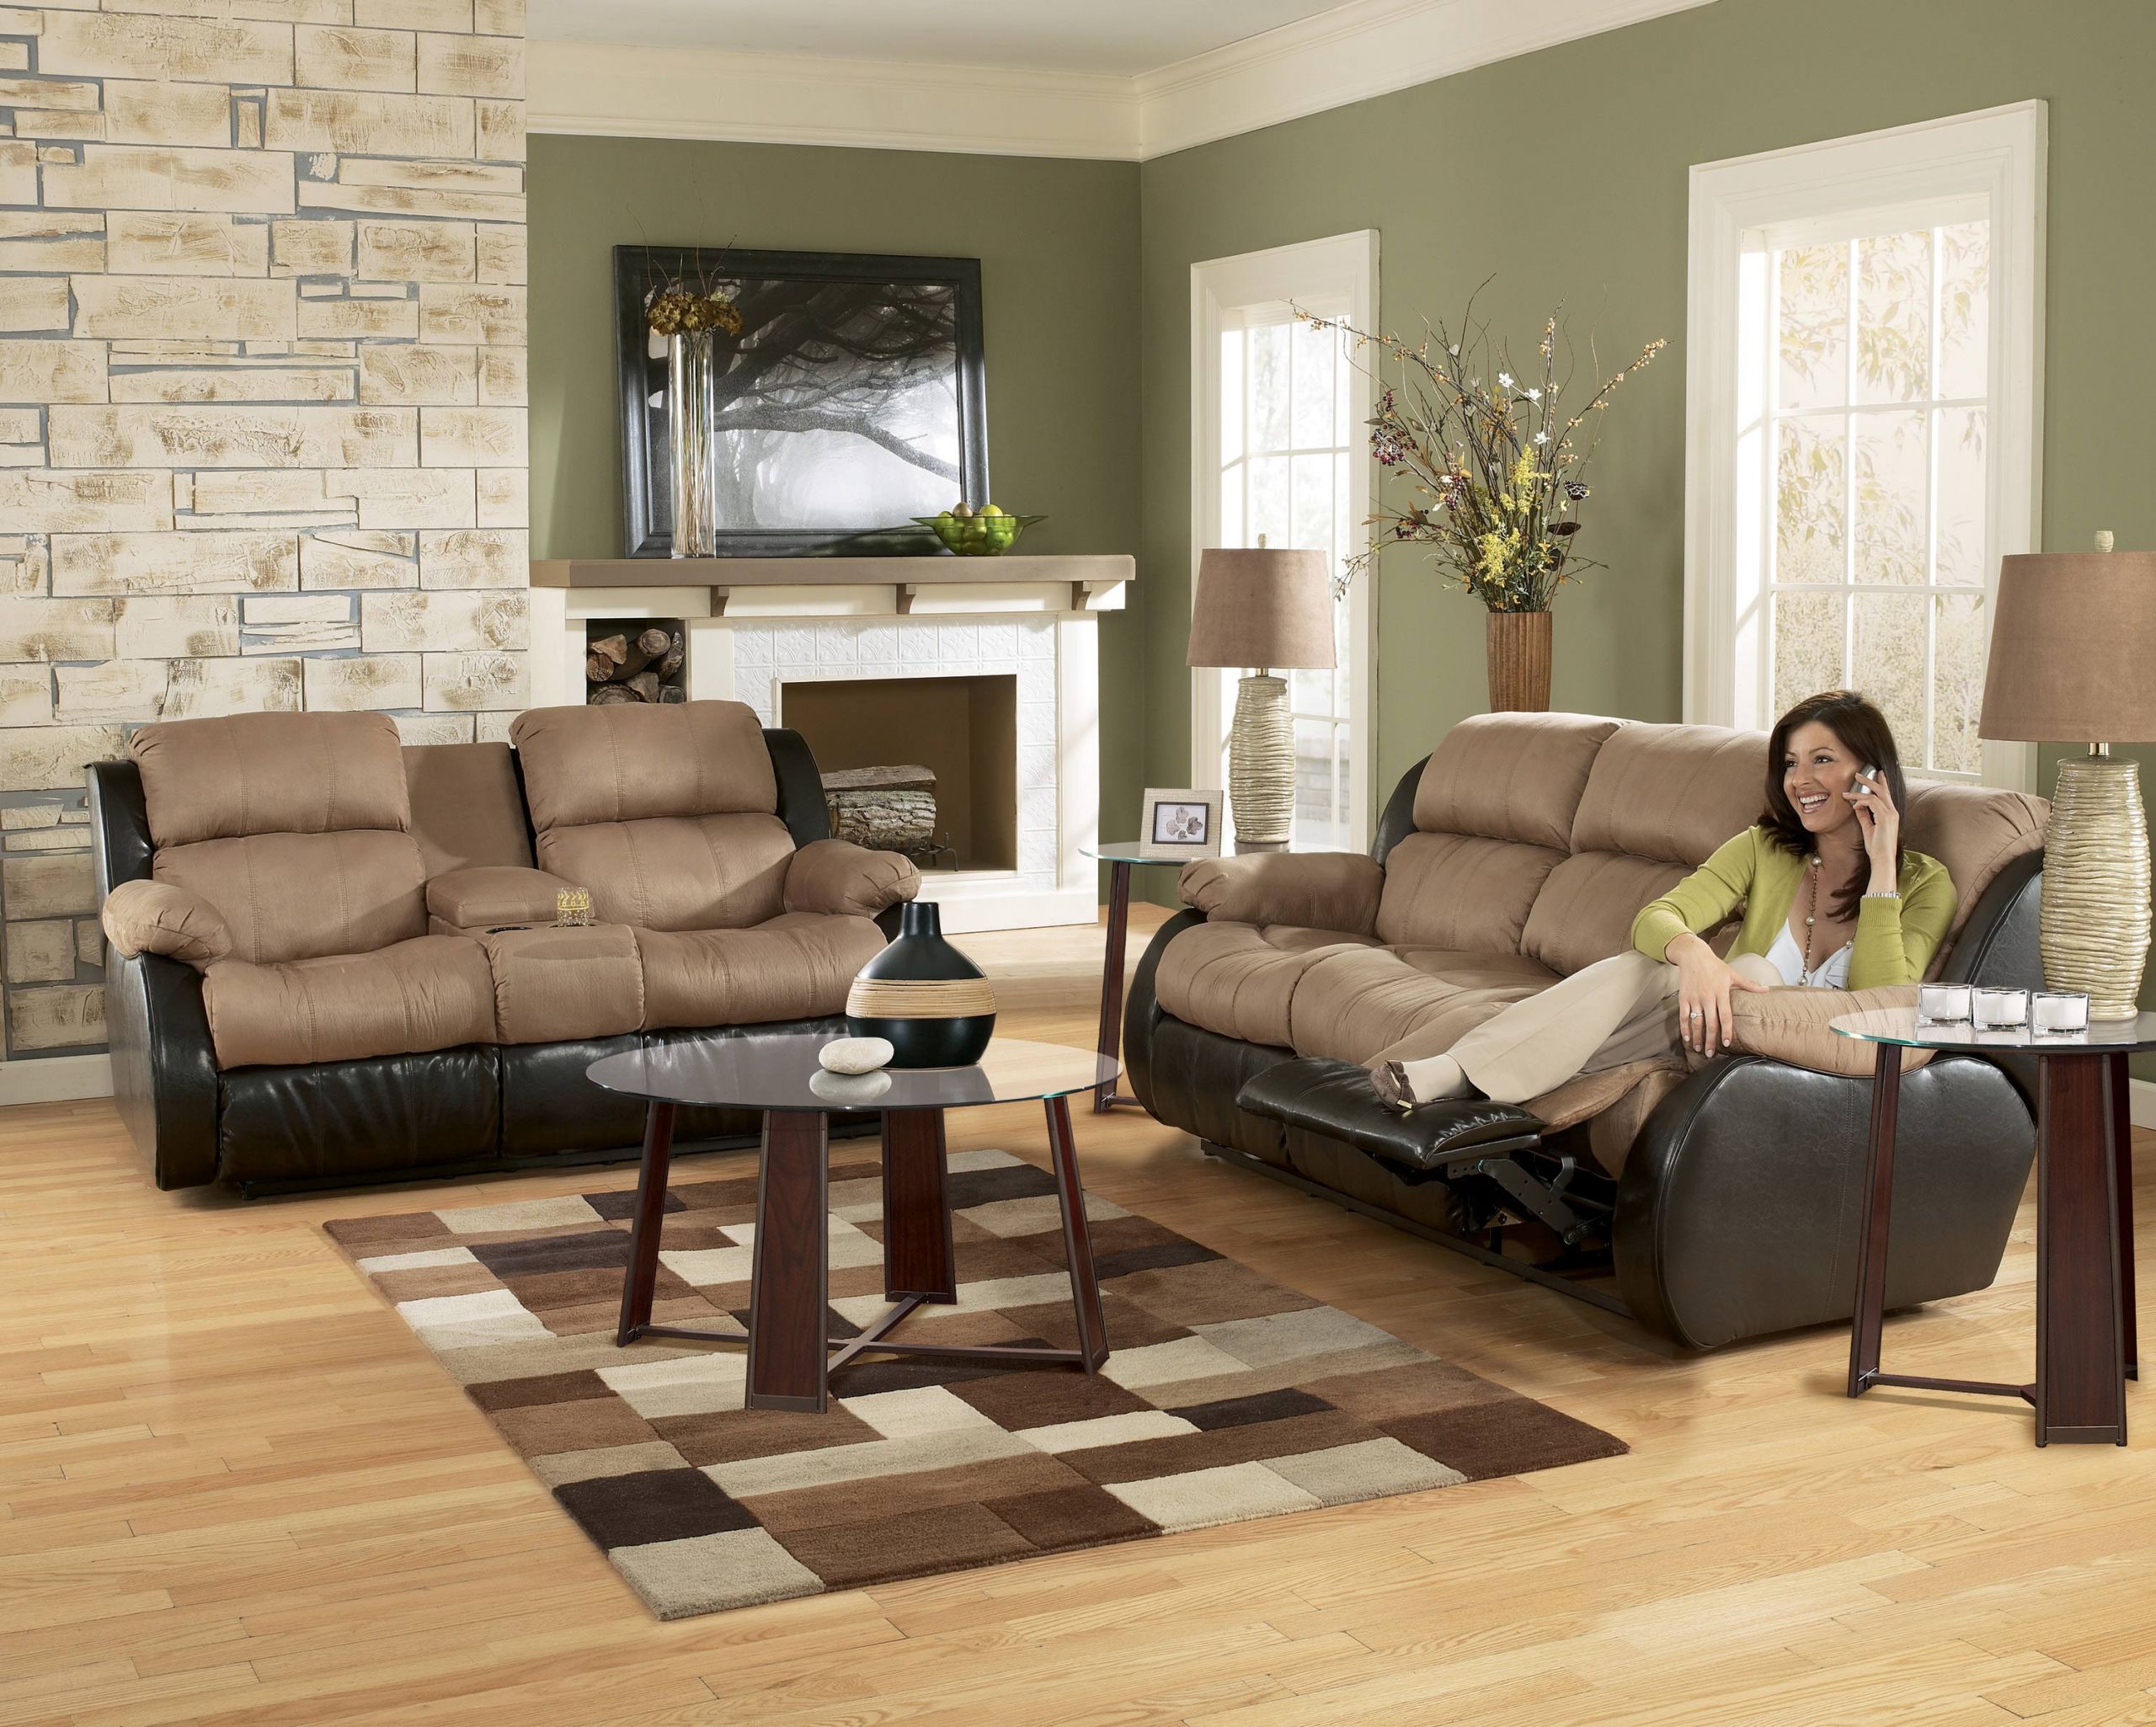 Living Room Recliner Chairs
 Furniture of America Living Room Collections